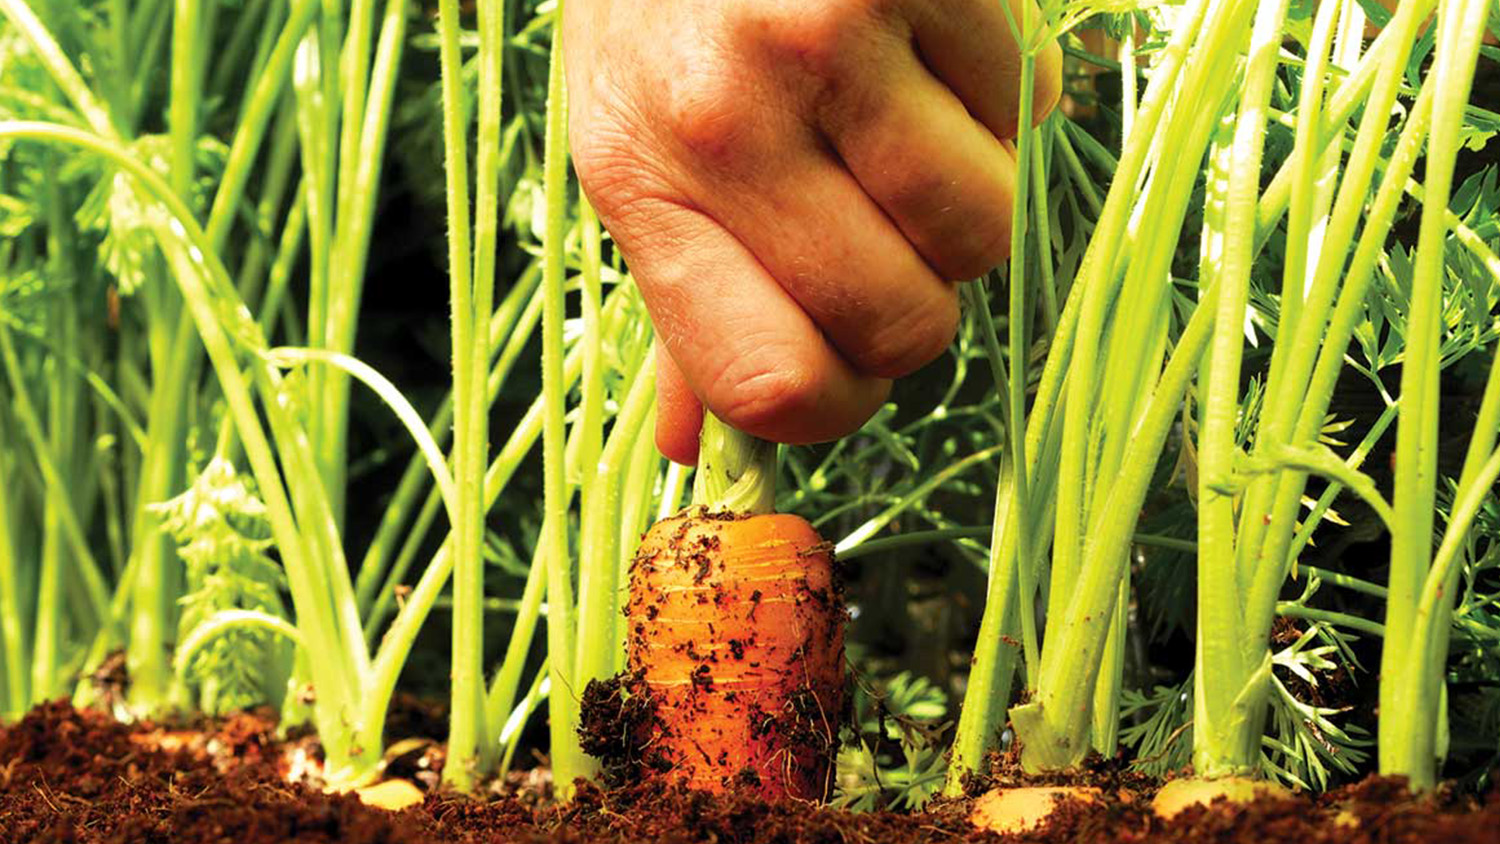 Carrot being pulled up from ground